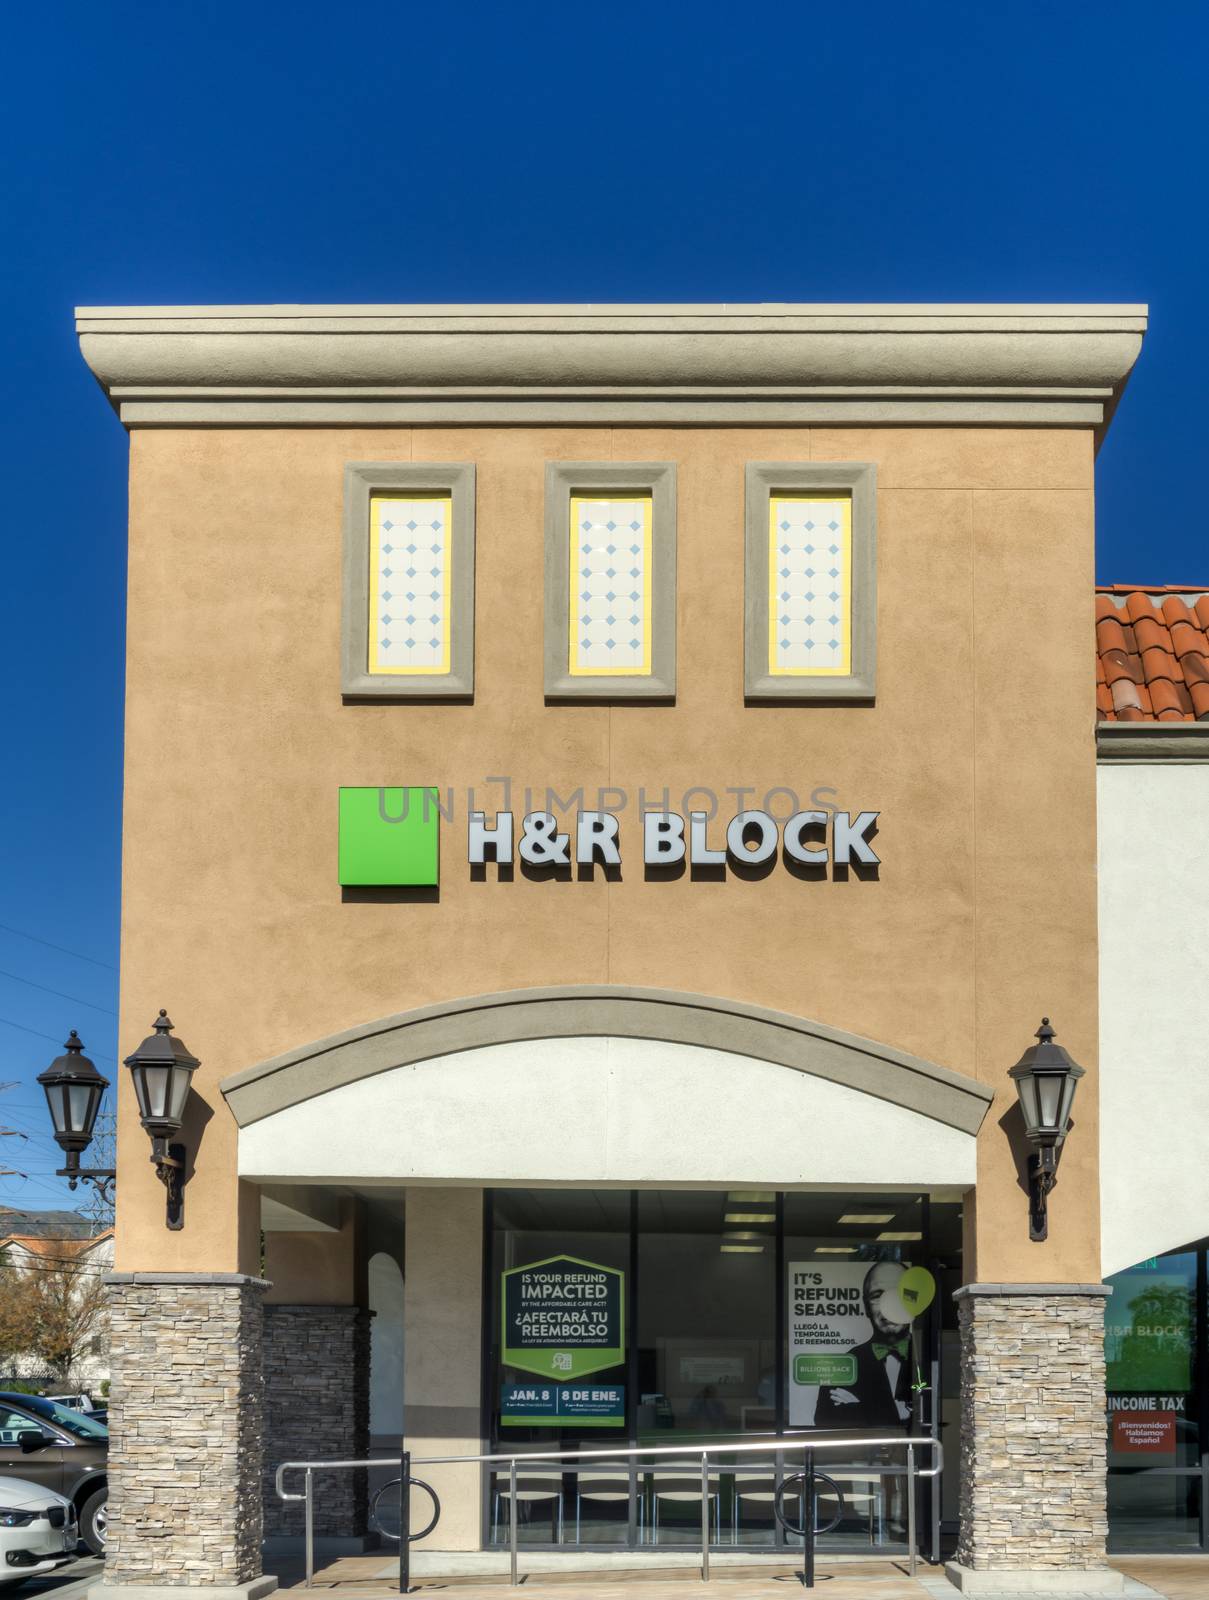 H&R Block Retail Exterior by wolterk